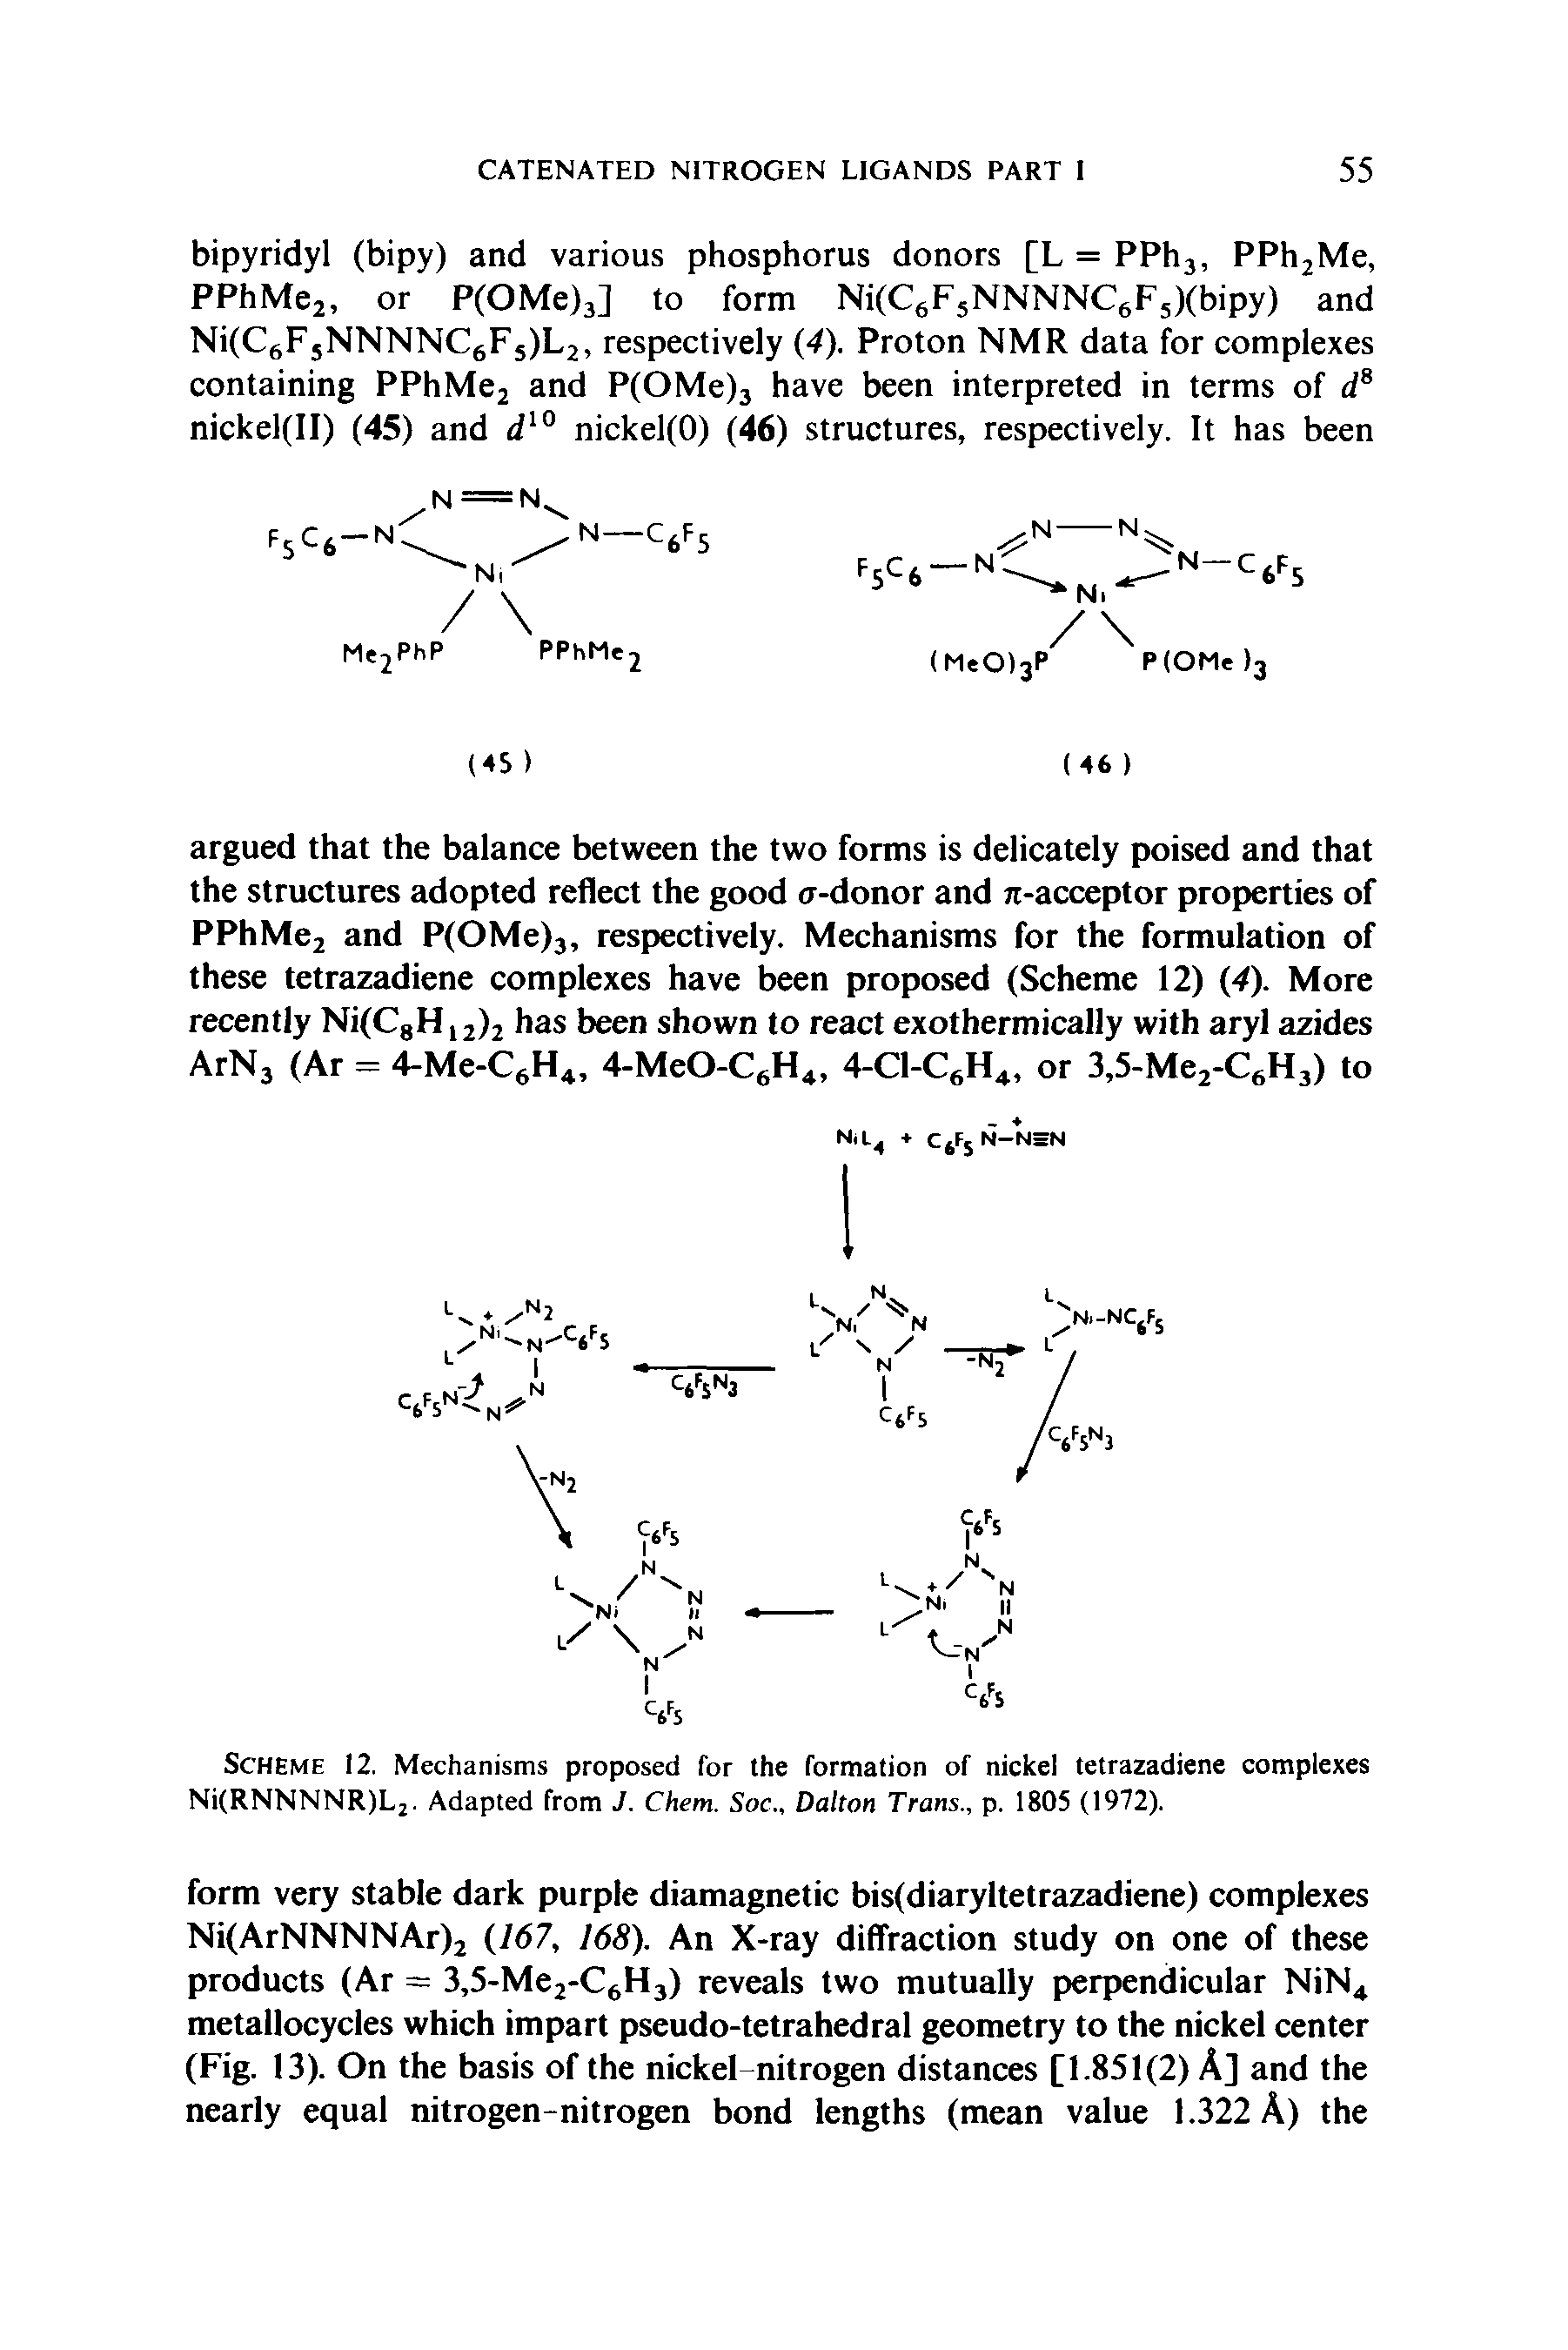 Scheme 12. Mechanisms proposed for the formation of nickel tetrazadiene complexes Ni(RNNNNR)L2- Adapted from J. Chetn. Soc., Dalton Trans., p. 1805 (1972).